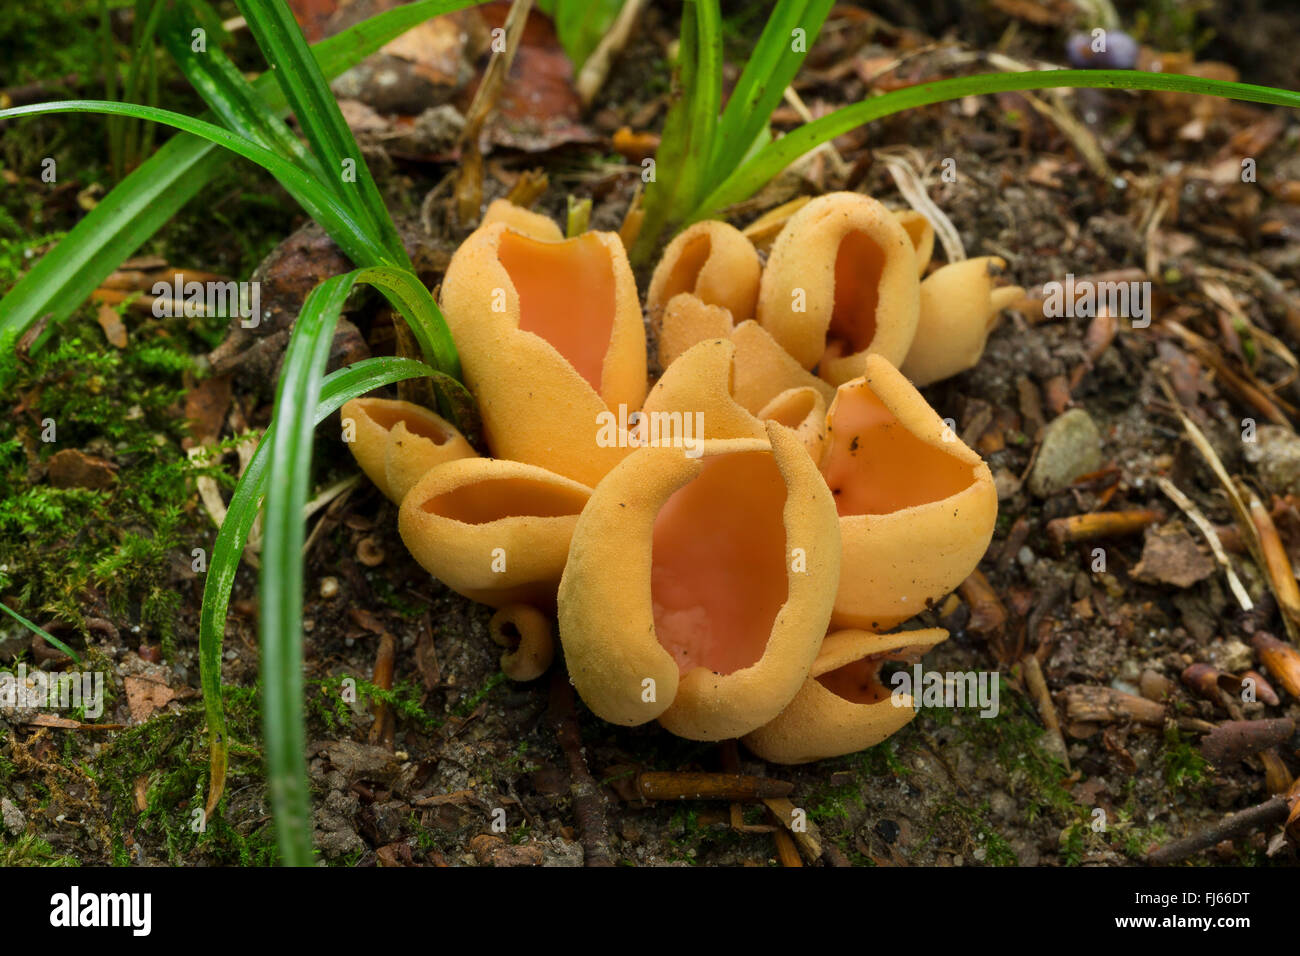 hare's ear (Otidea onotica), fruiting bodies on forest ground, Germany Stock Photo